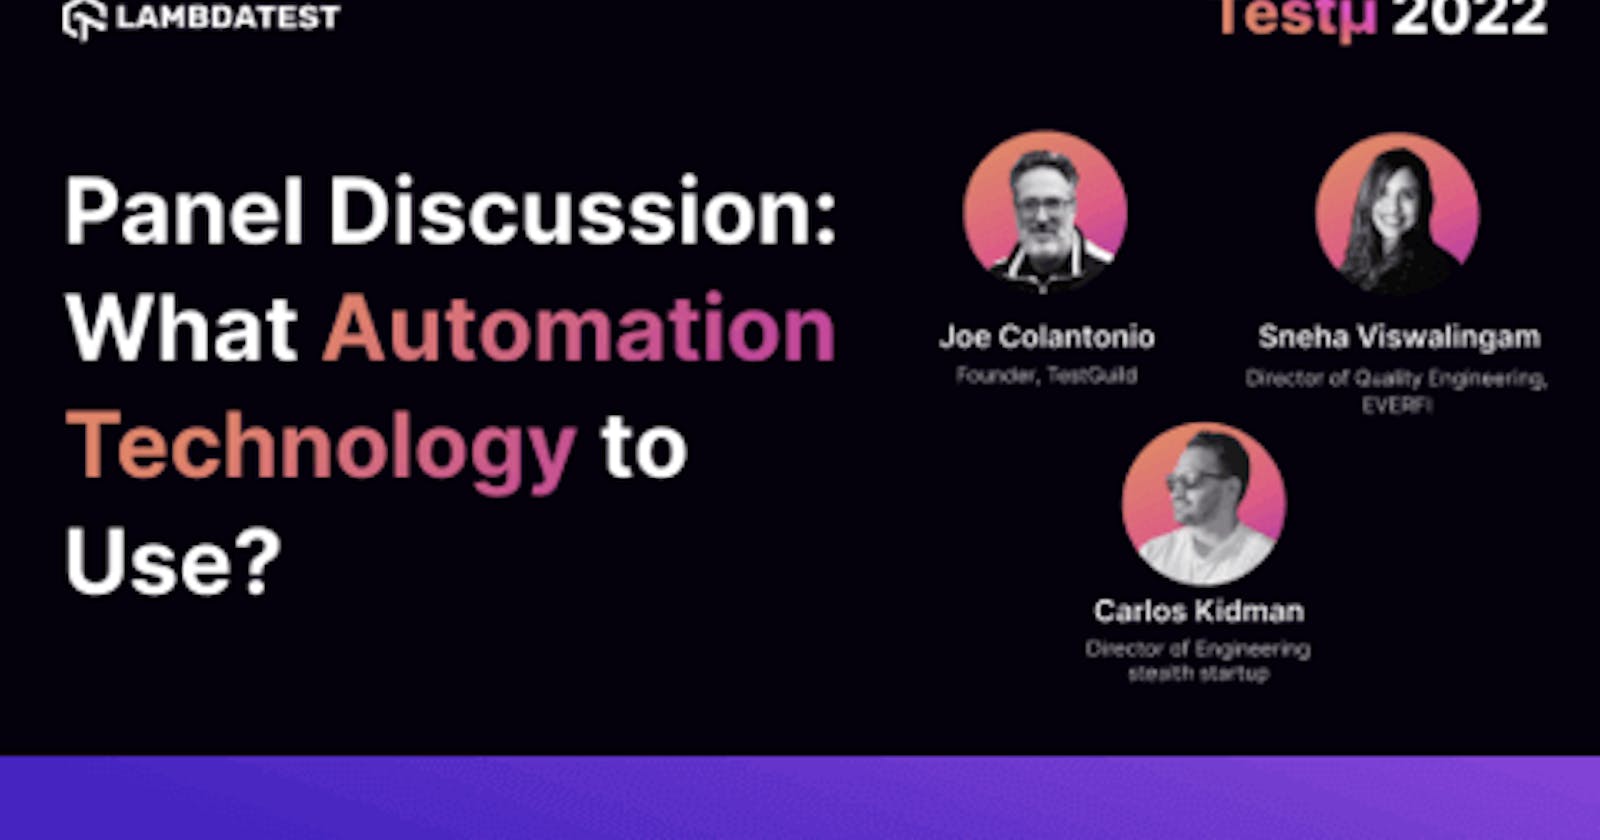 Panel Discussion: How to Decide What Automation Technology to Use [Testμ 2022]